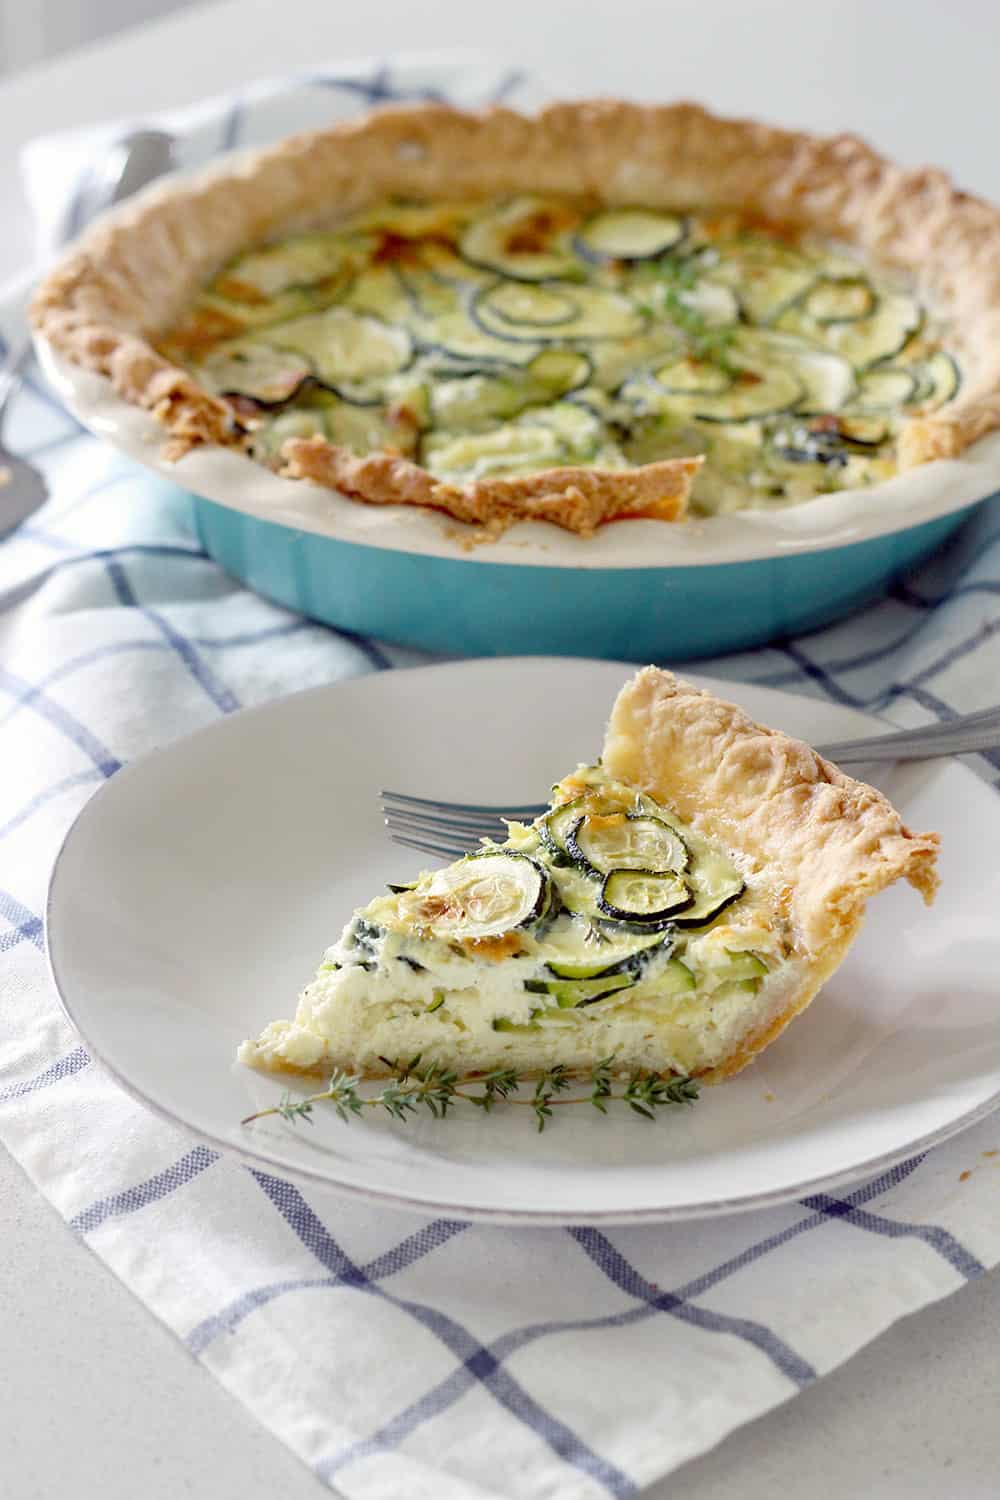 With only six ingredients and about 5 minutes of prep, this quiche is the ultimate easy (and GORGEOUS!) meal for breakfast, lunch, or dinner!